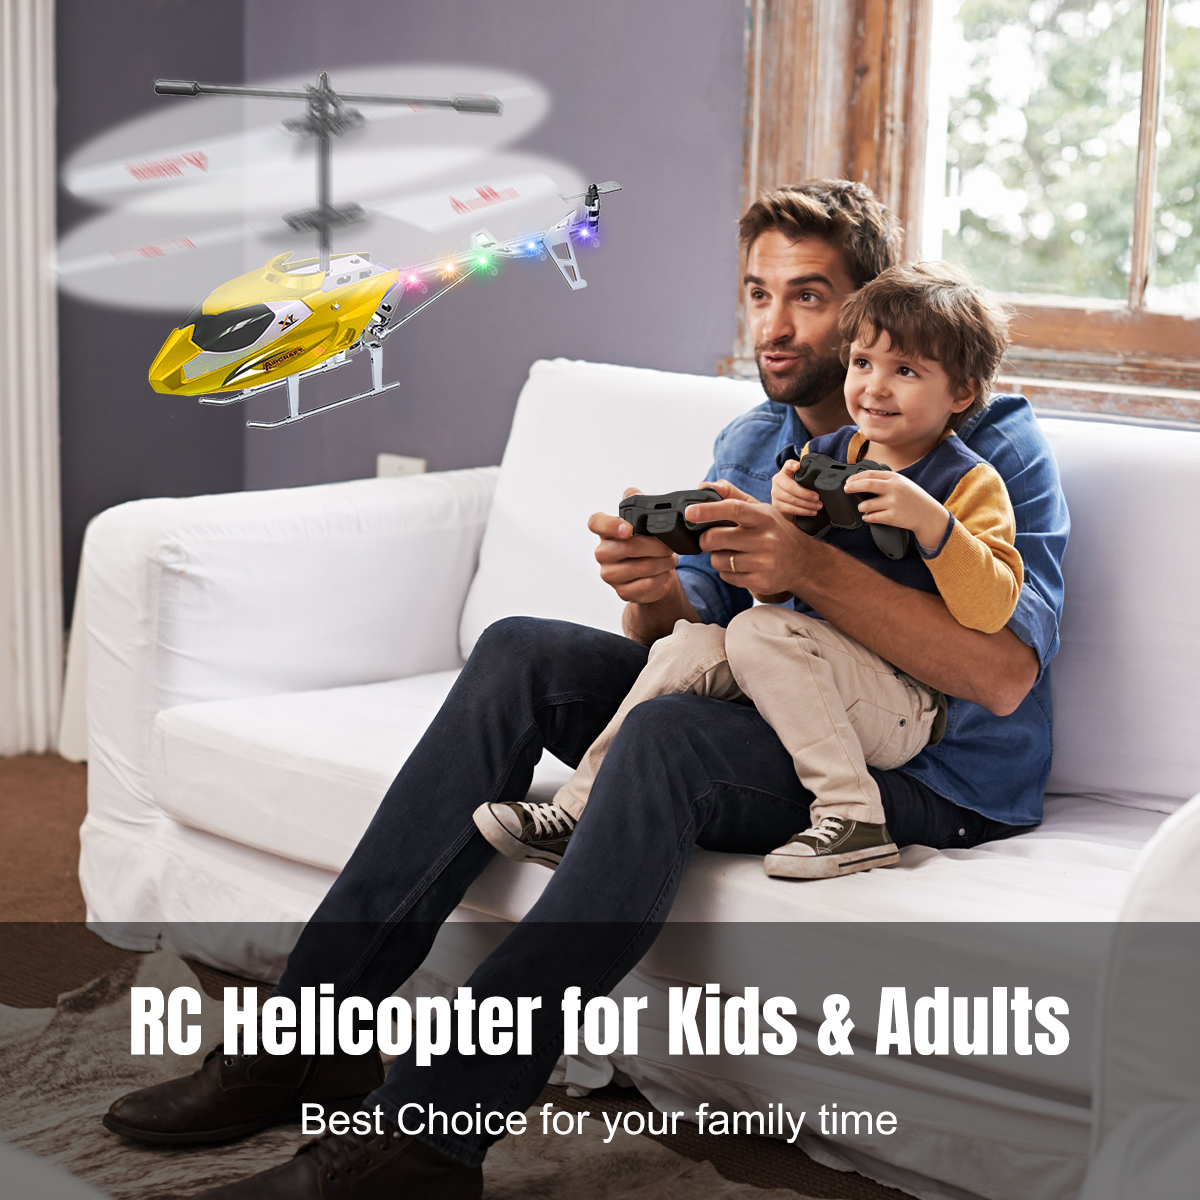 PayUSD Remote Control Helicopter Mini Gyroscope RC Helicopters LED Light for Indoor to Fly for Kids and Beginners, Yellow - image 2 of 8